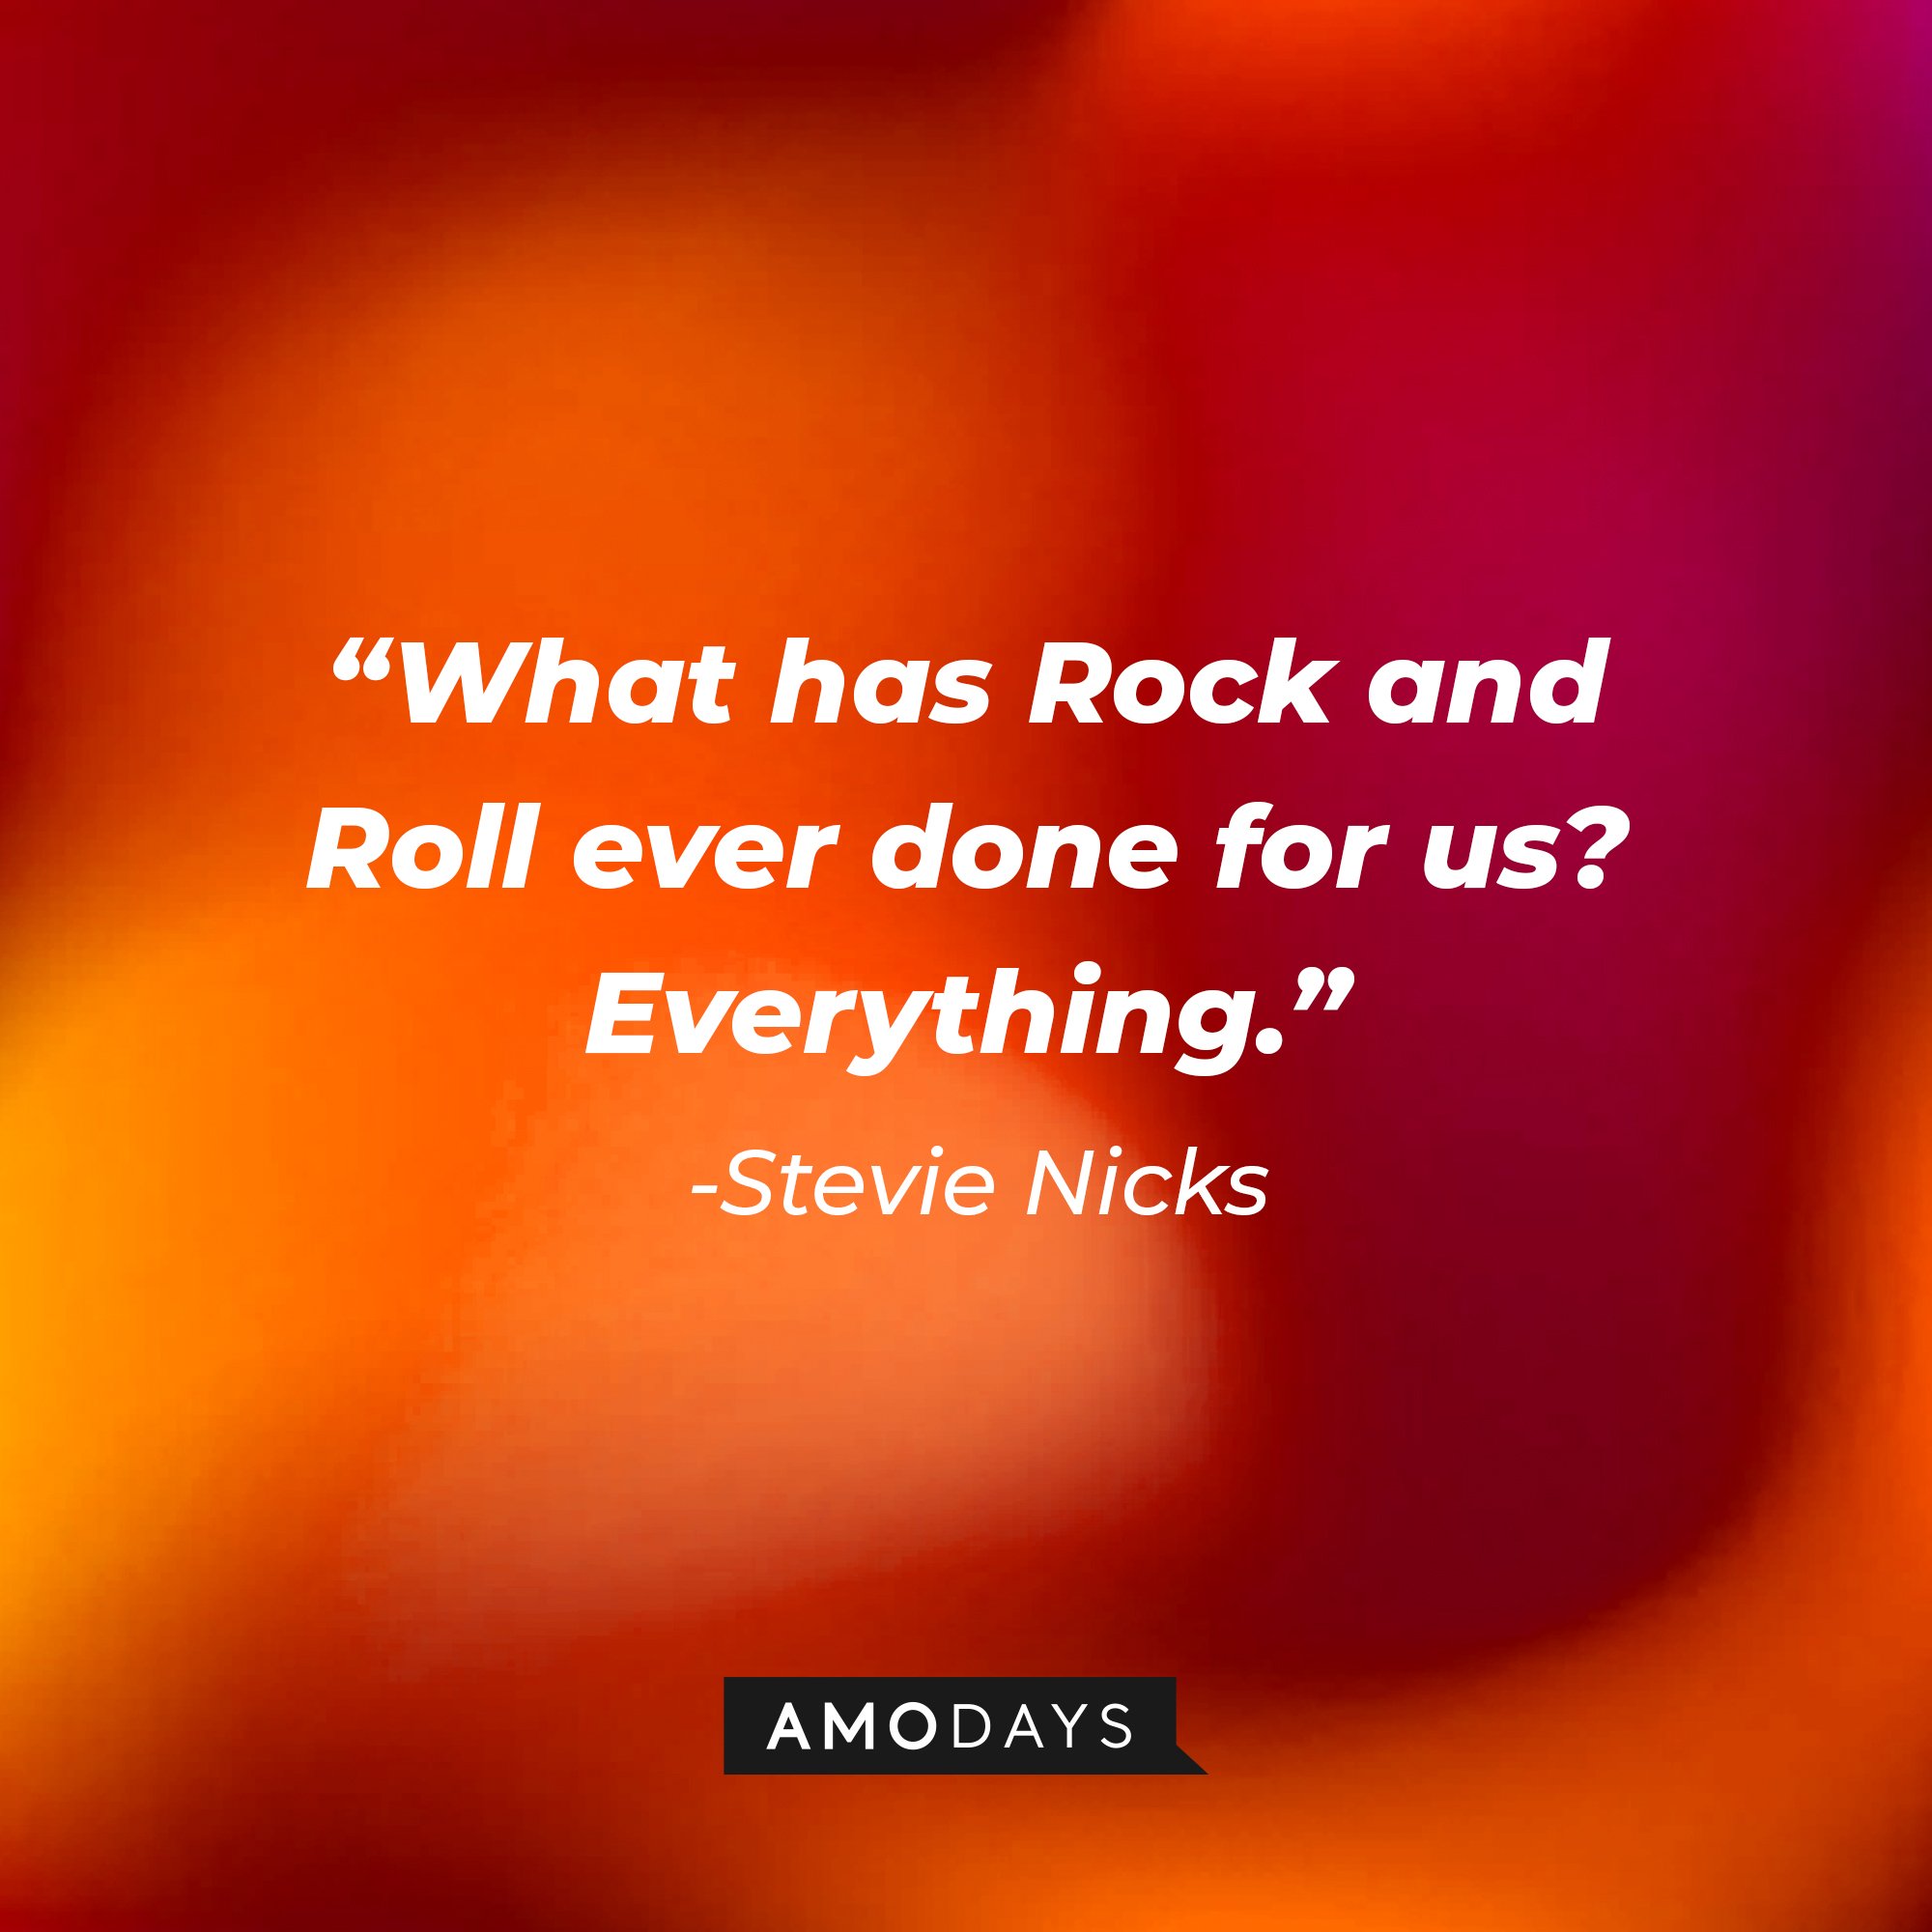 Stevie Nicks's quote: "What has Rock and Roll ever done for us? Everything." | Image: AmoDays